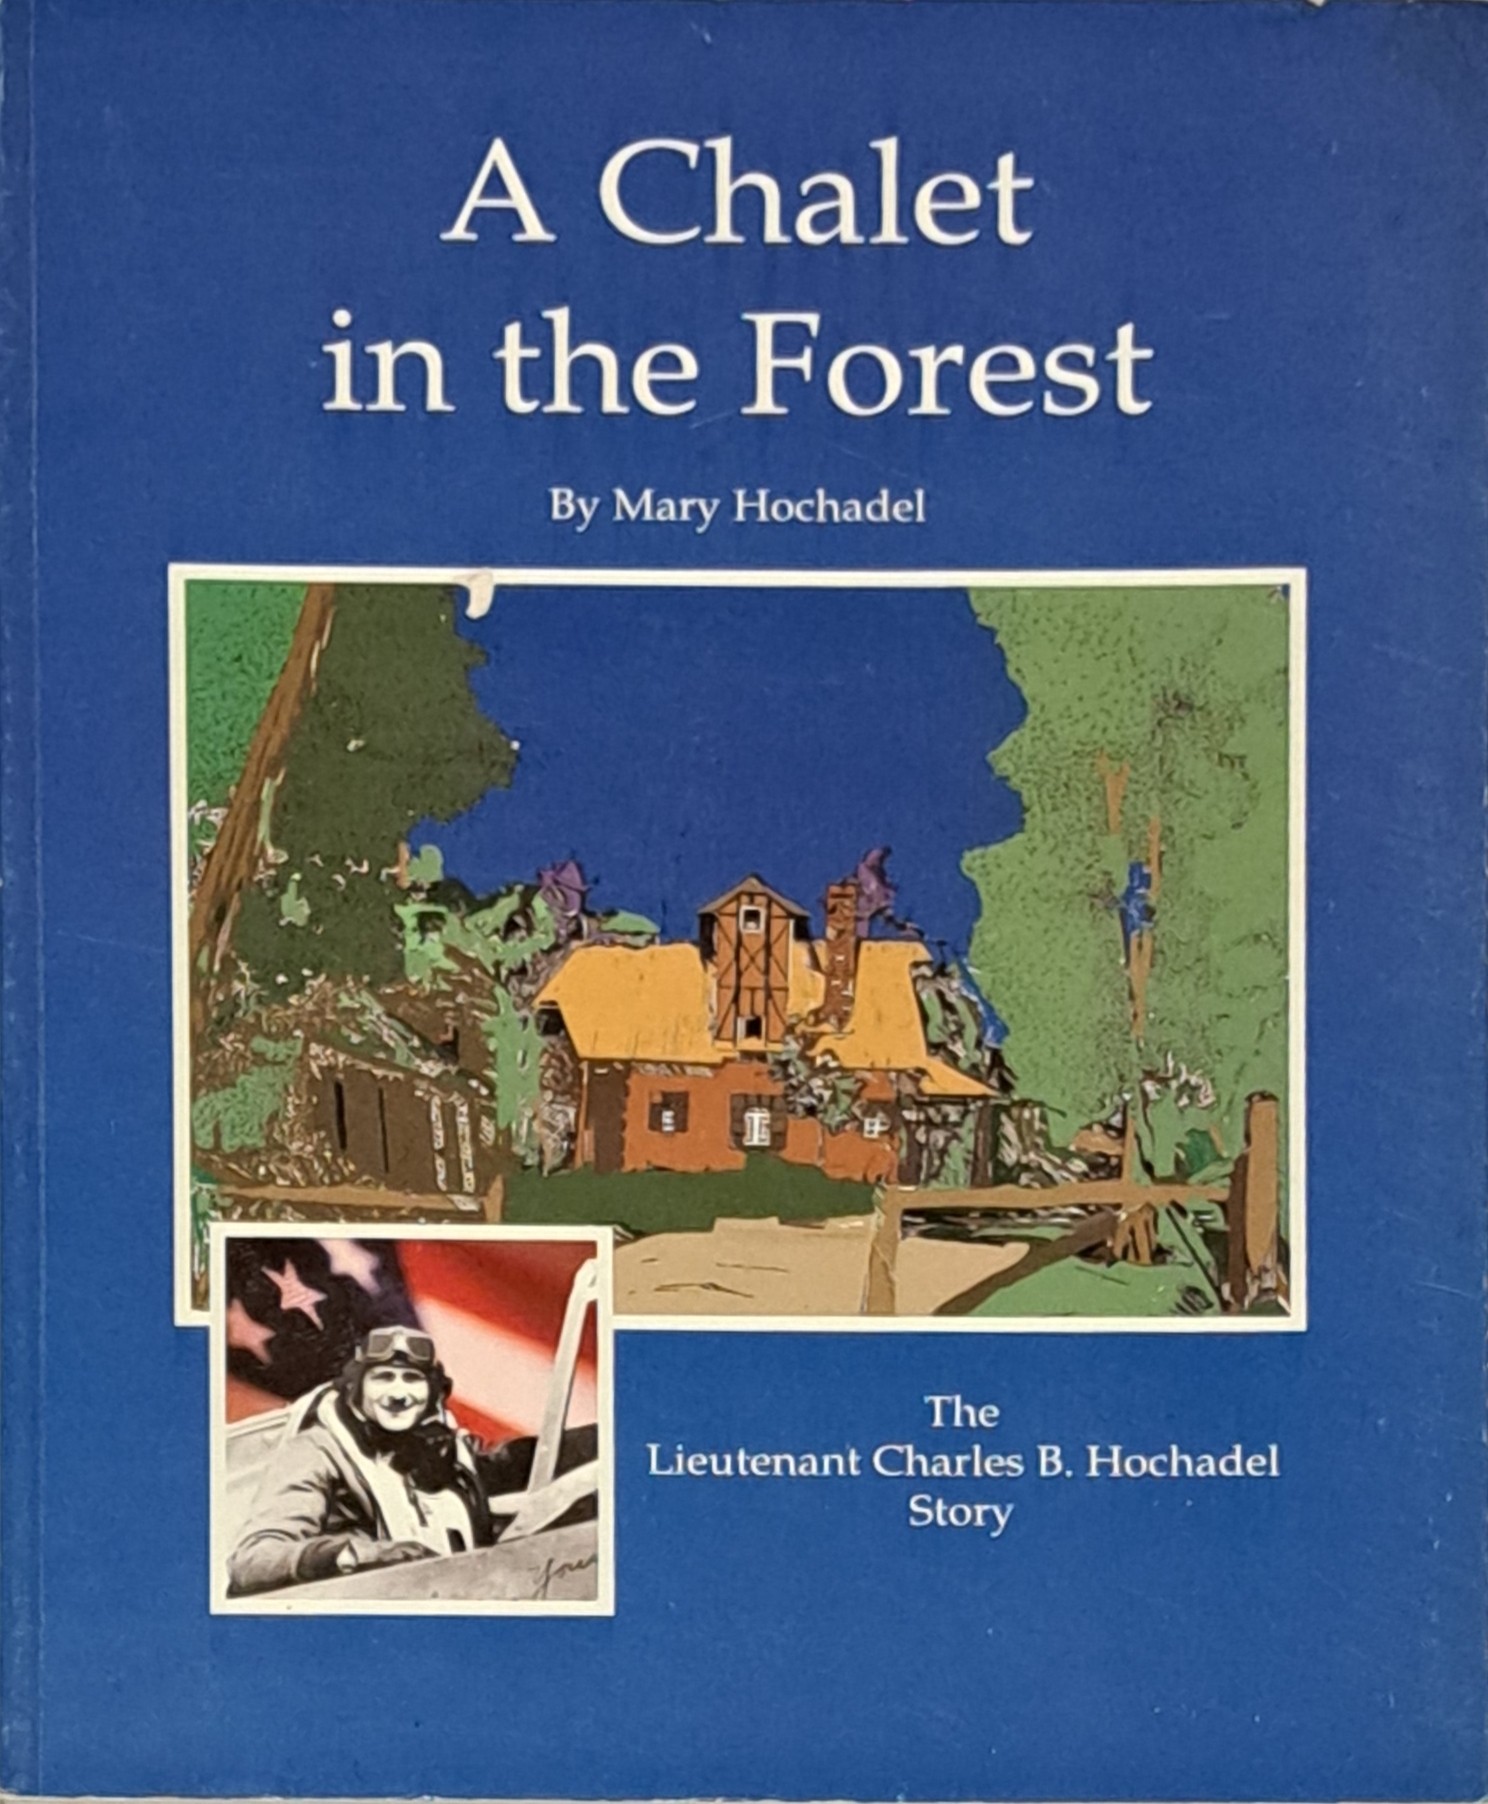 A Chalet in the Forest. Signed by author.